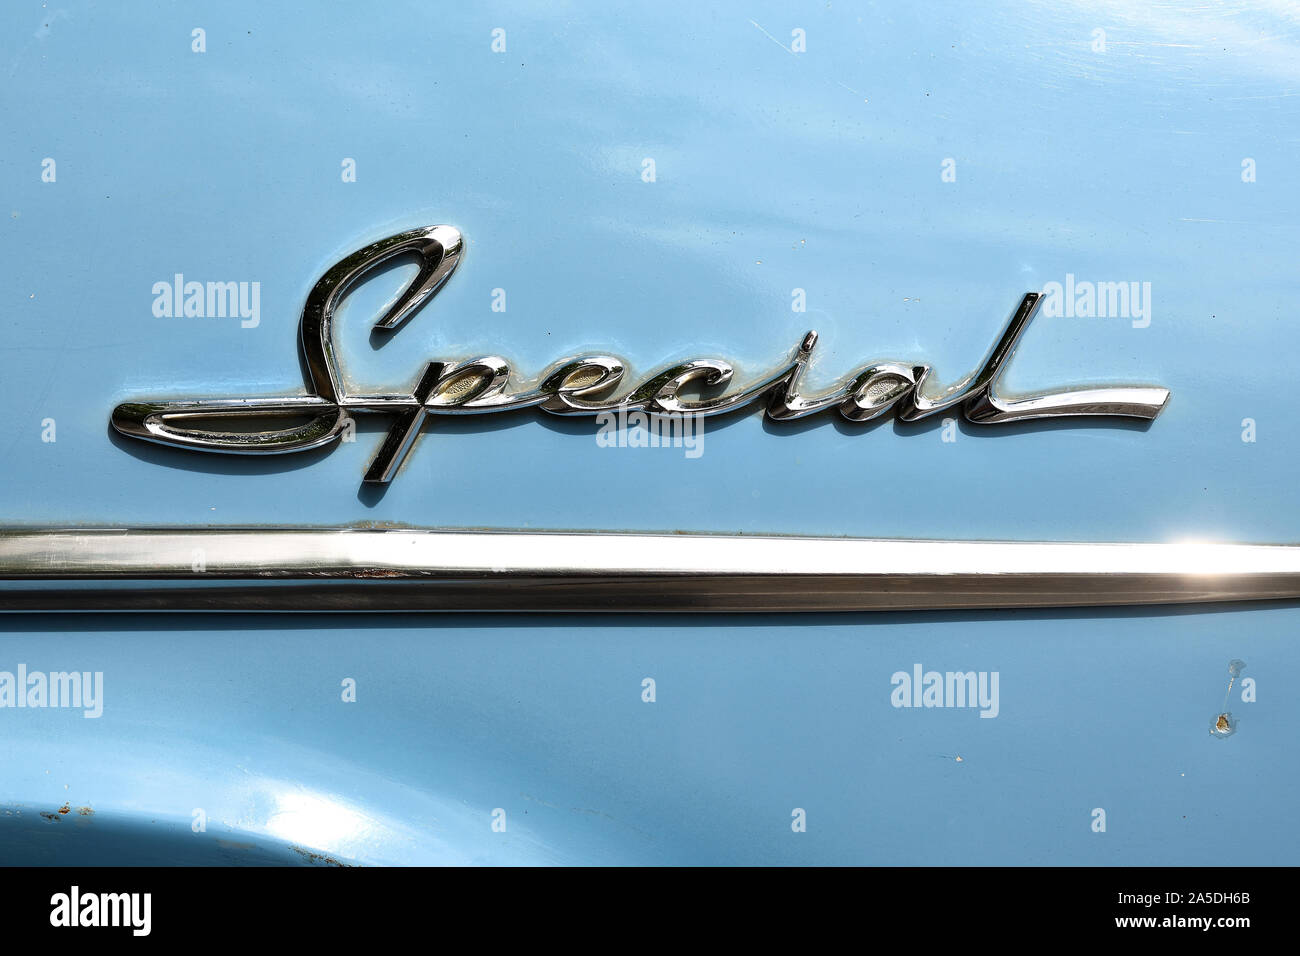 Holden 'Special' name plate Stock Photo